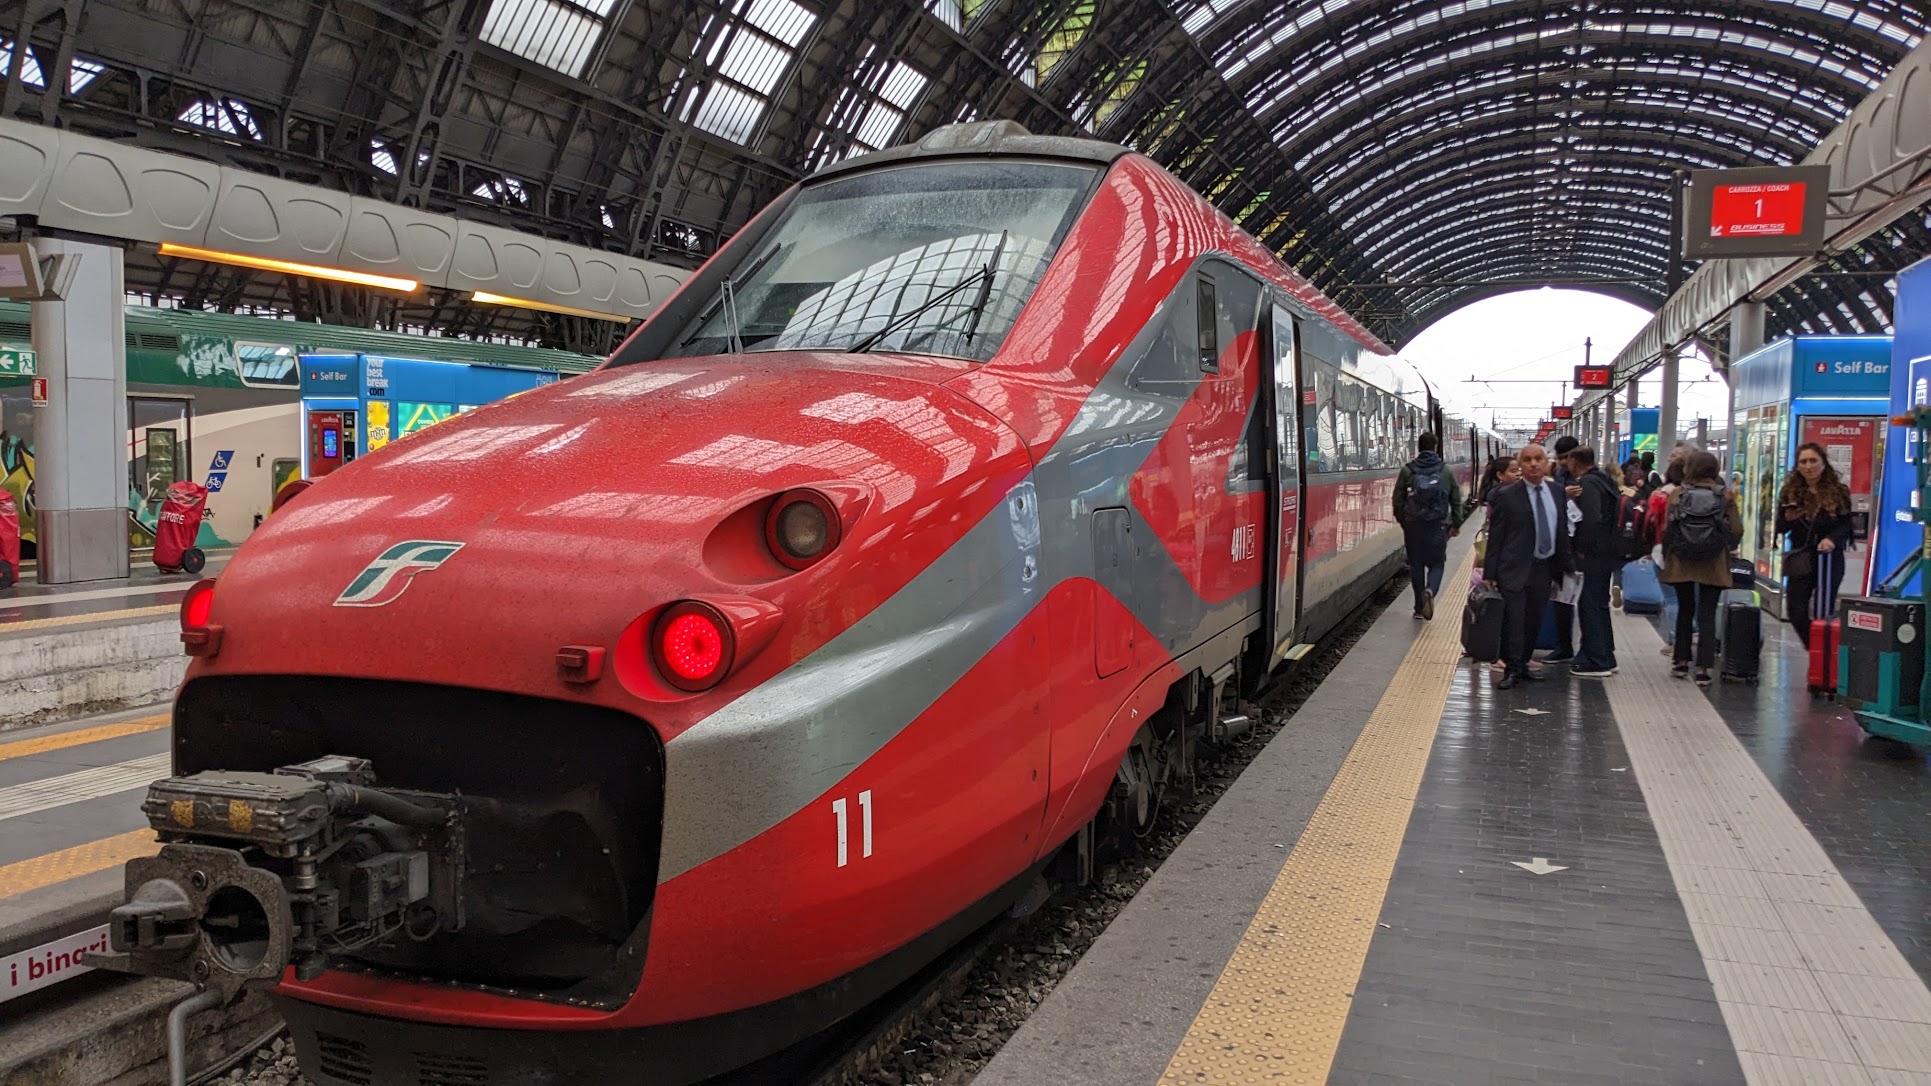 Train from Milano to Trieste